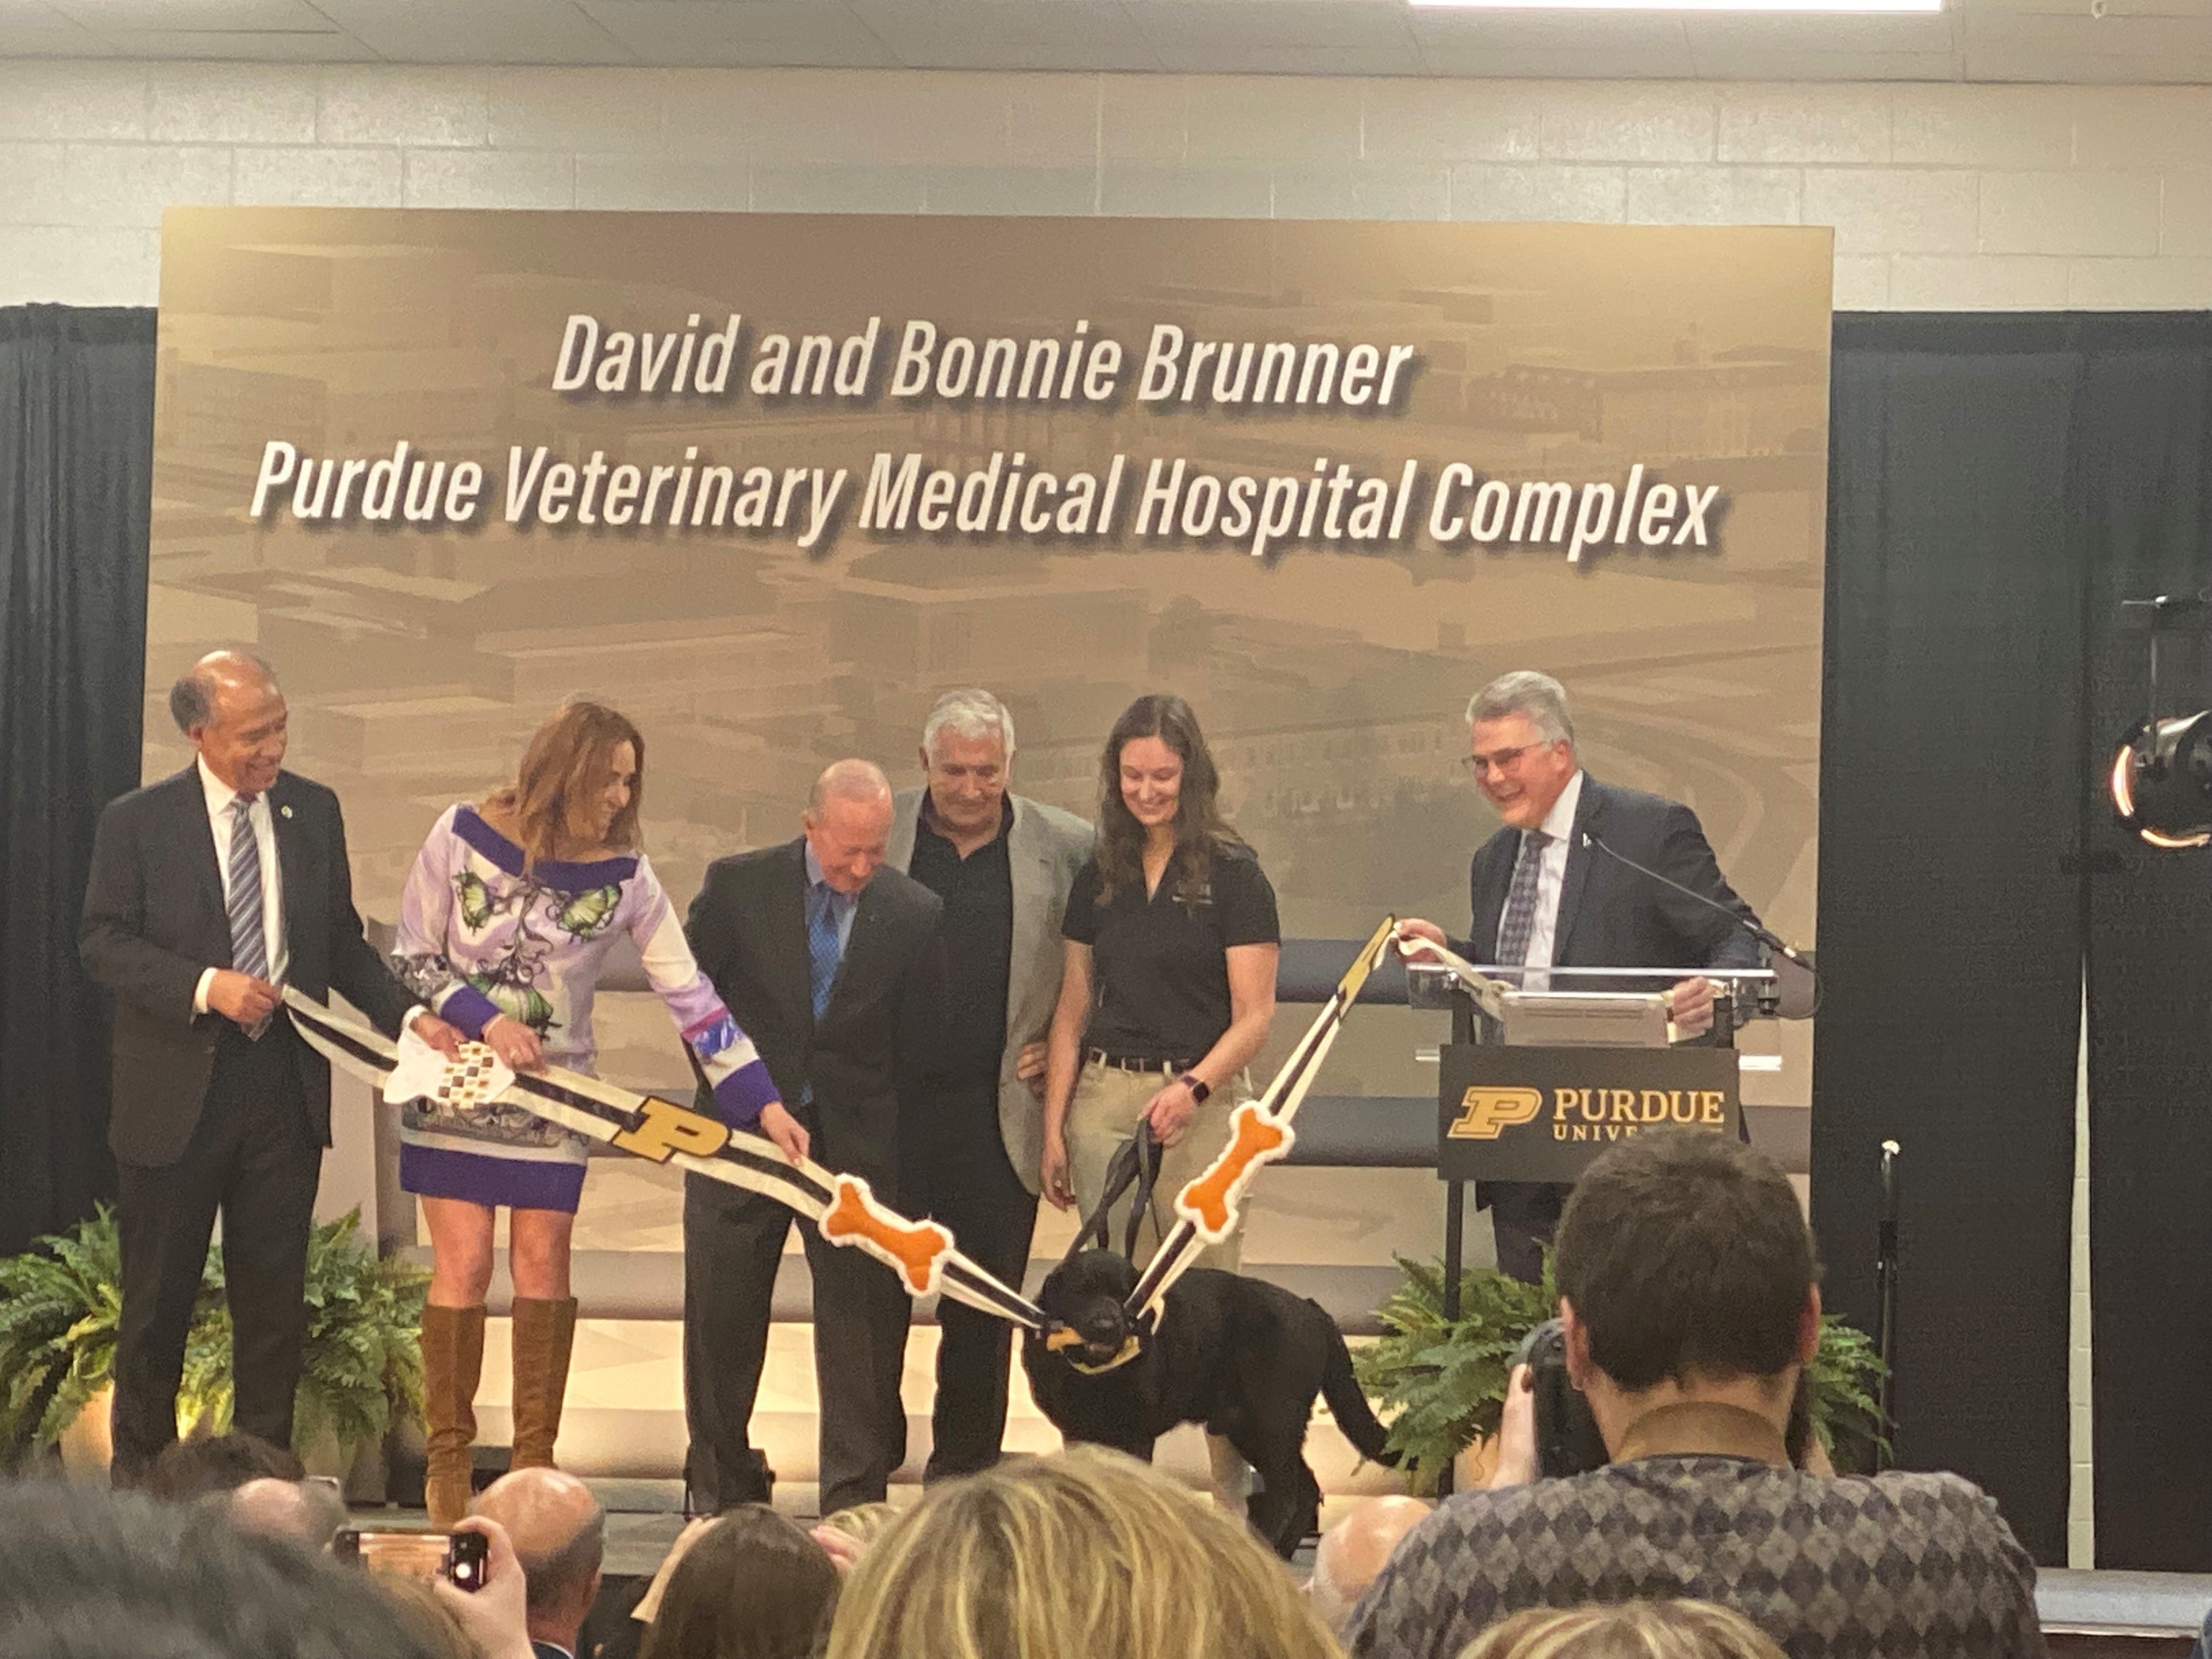 Veterinary facilities at Purdue dedicated, named after donor couple